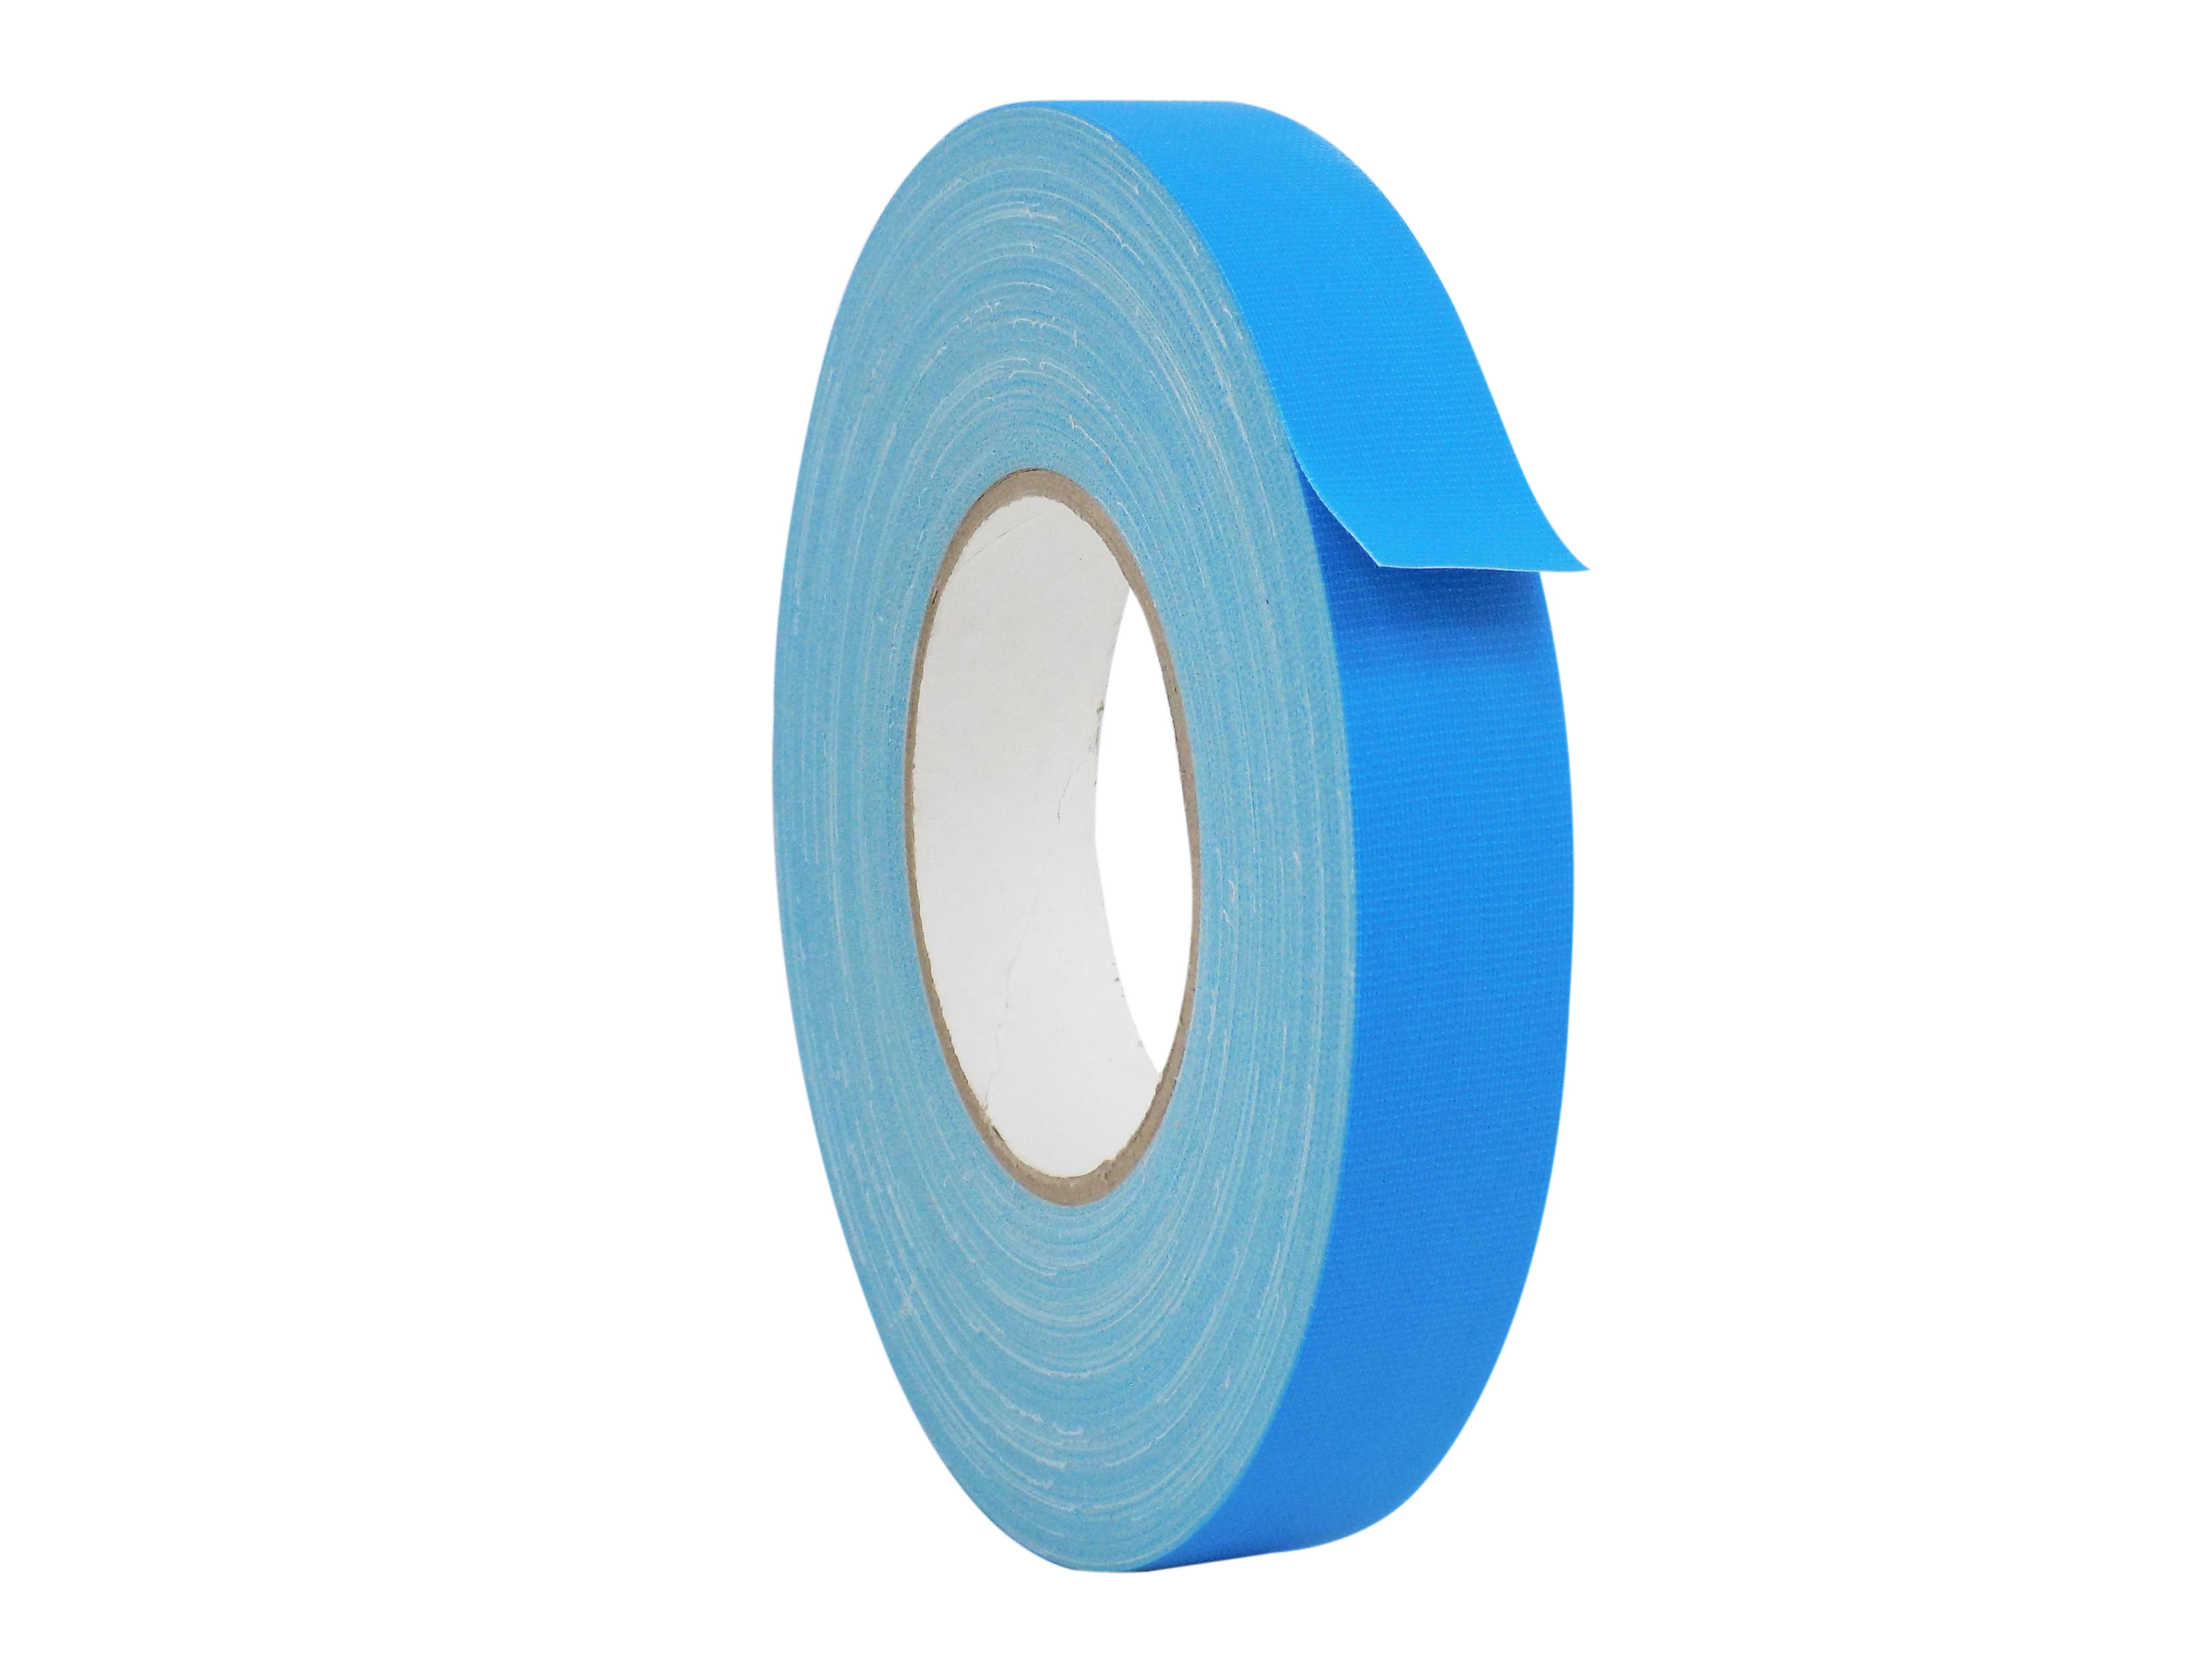 No Residue WOD Gaffer White Gaff Tape 2 inch x 60 yards LOW GLOSS FILM Strong 